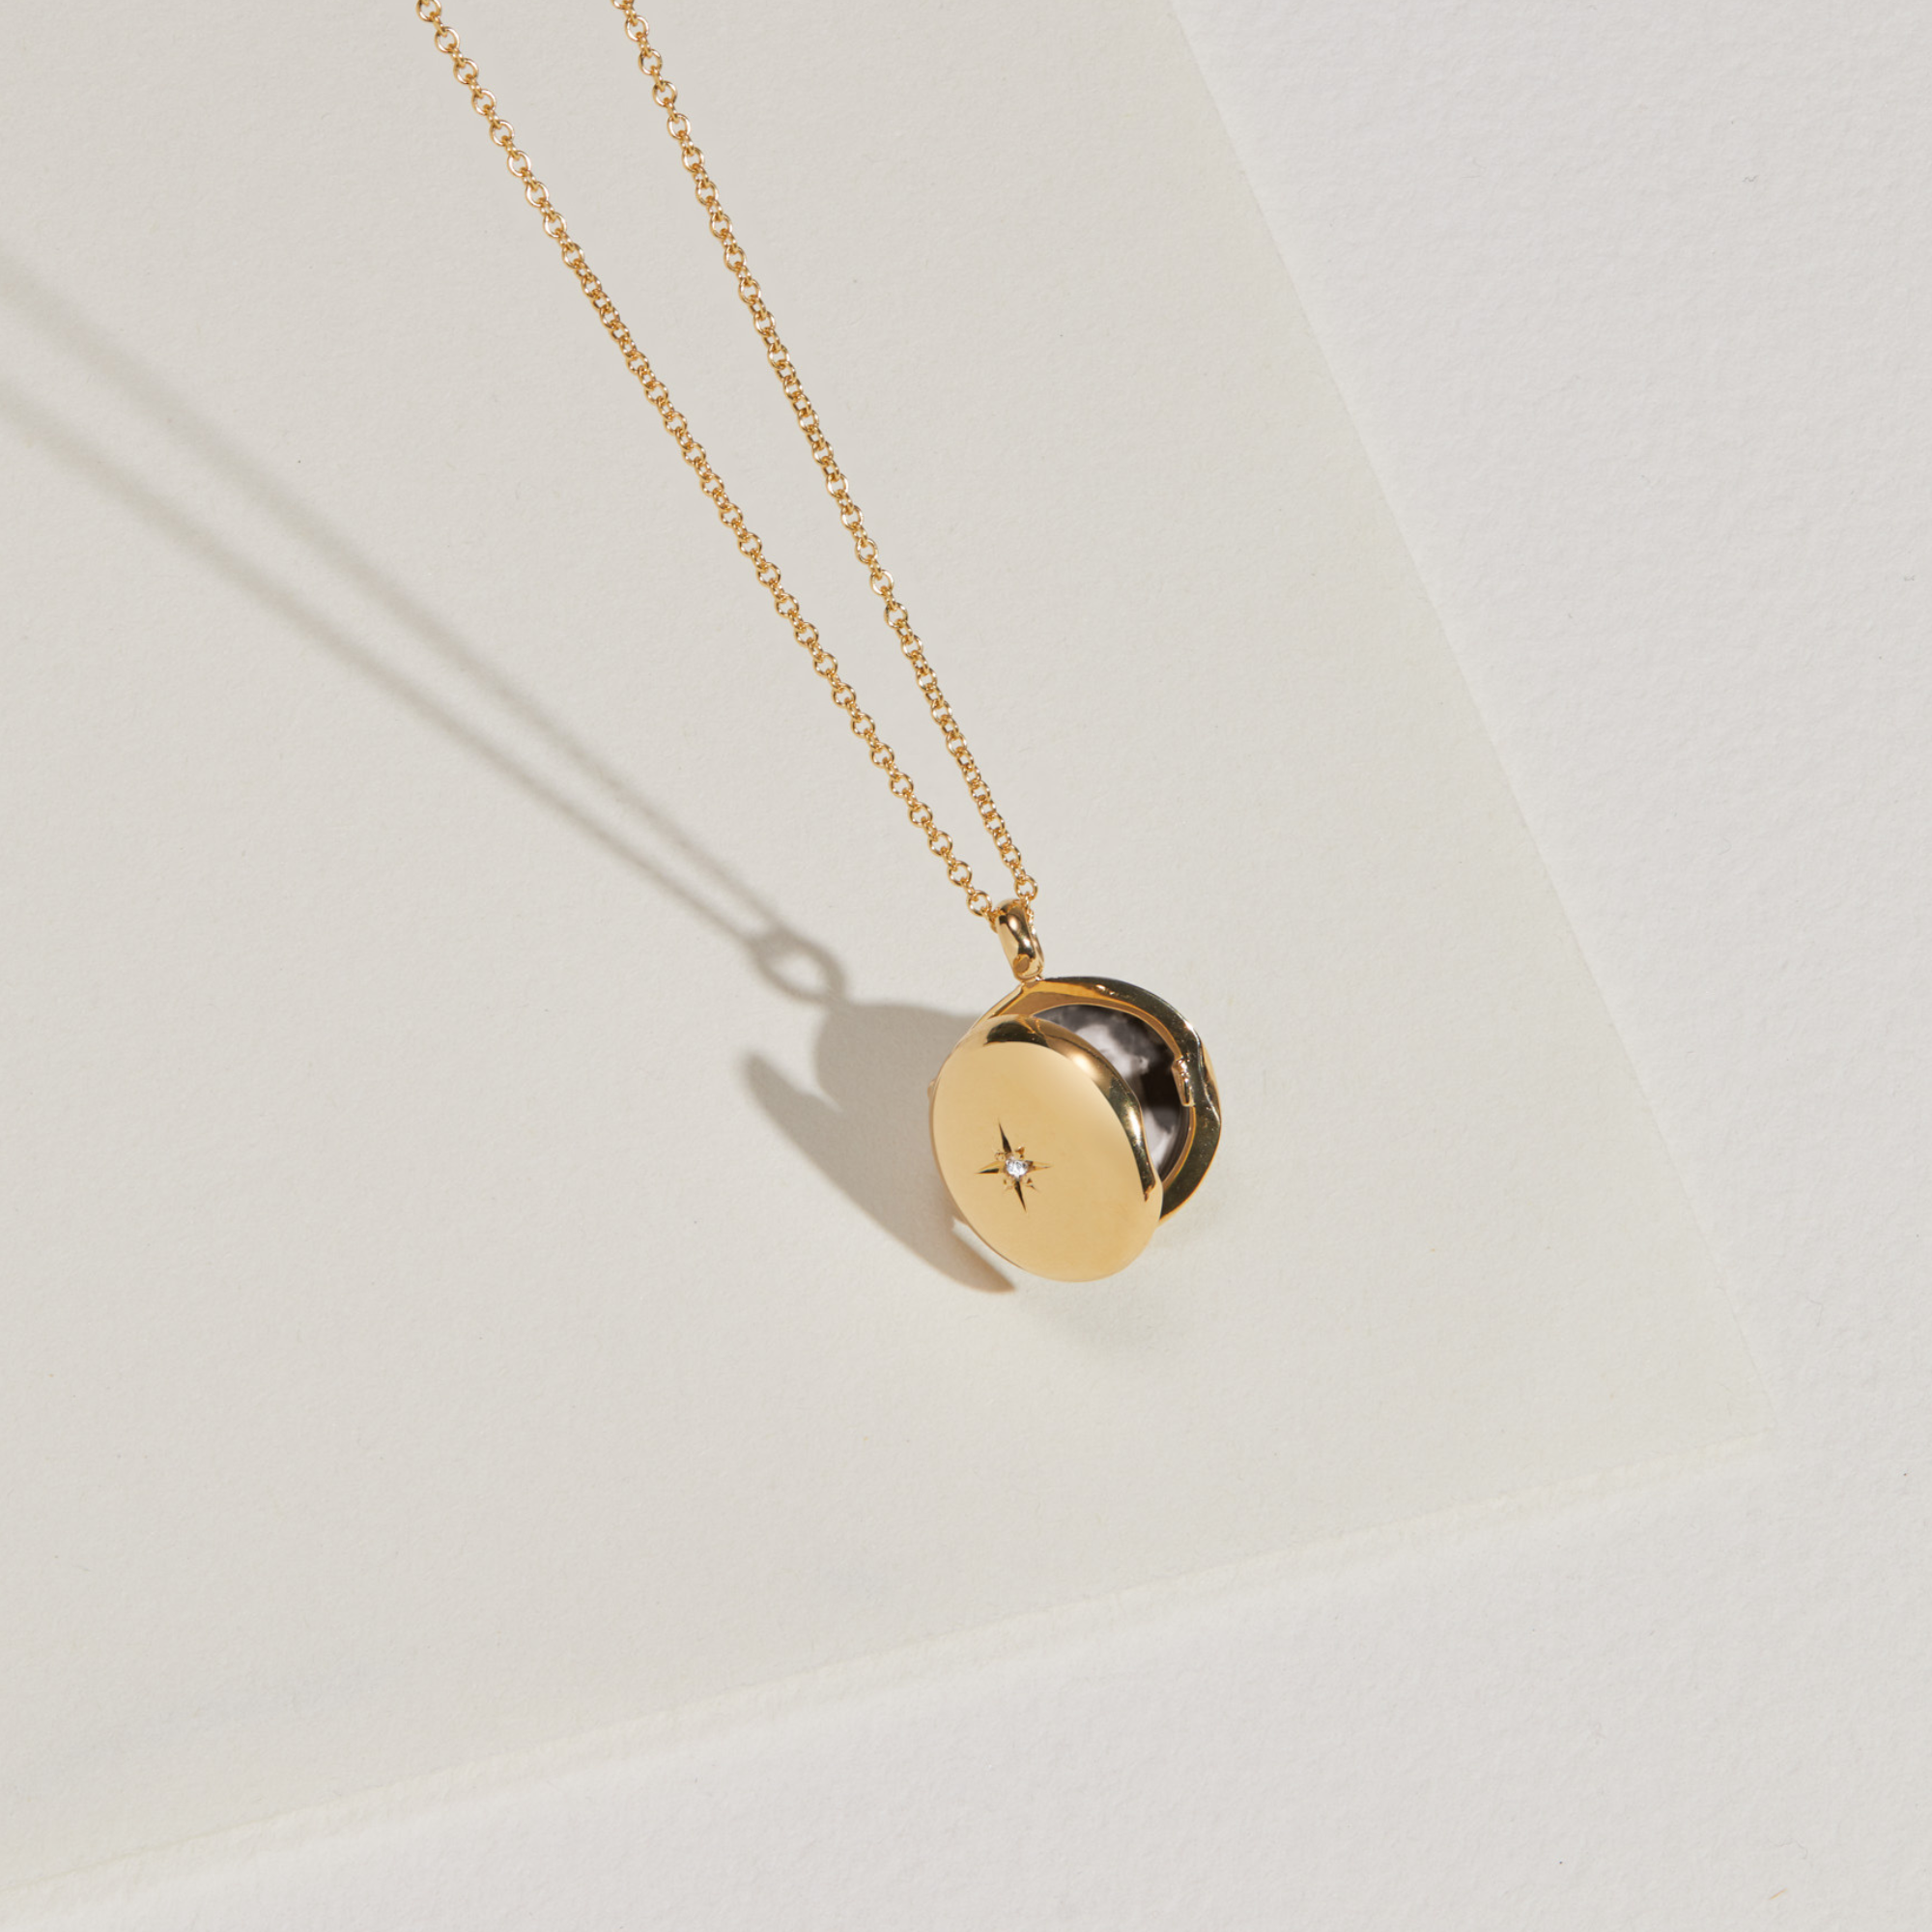 Open gold small round diamond locket necklace hanging infront of a paper surface